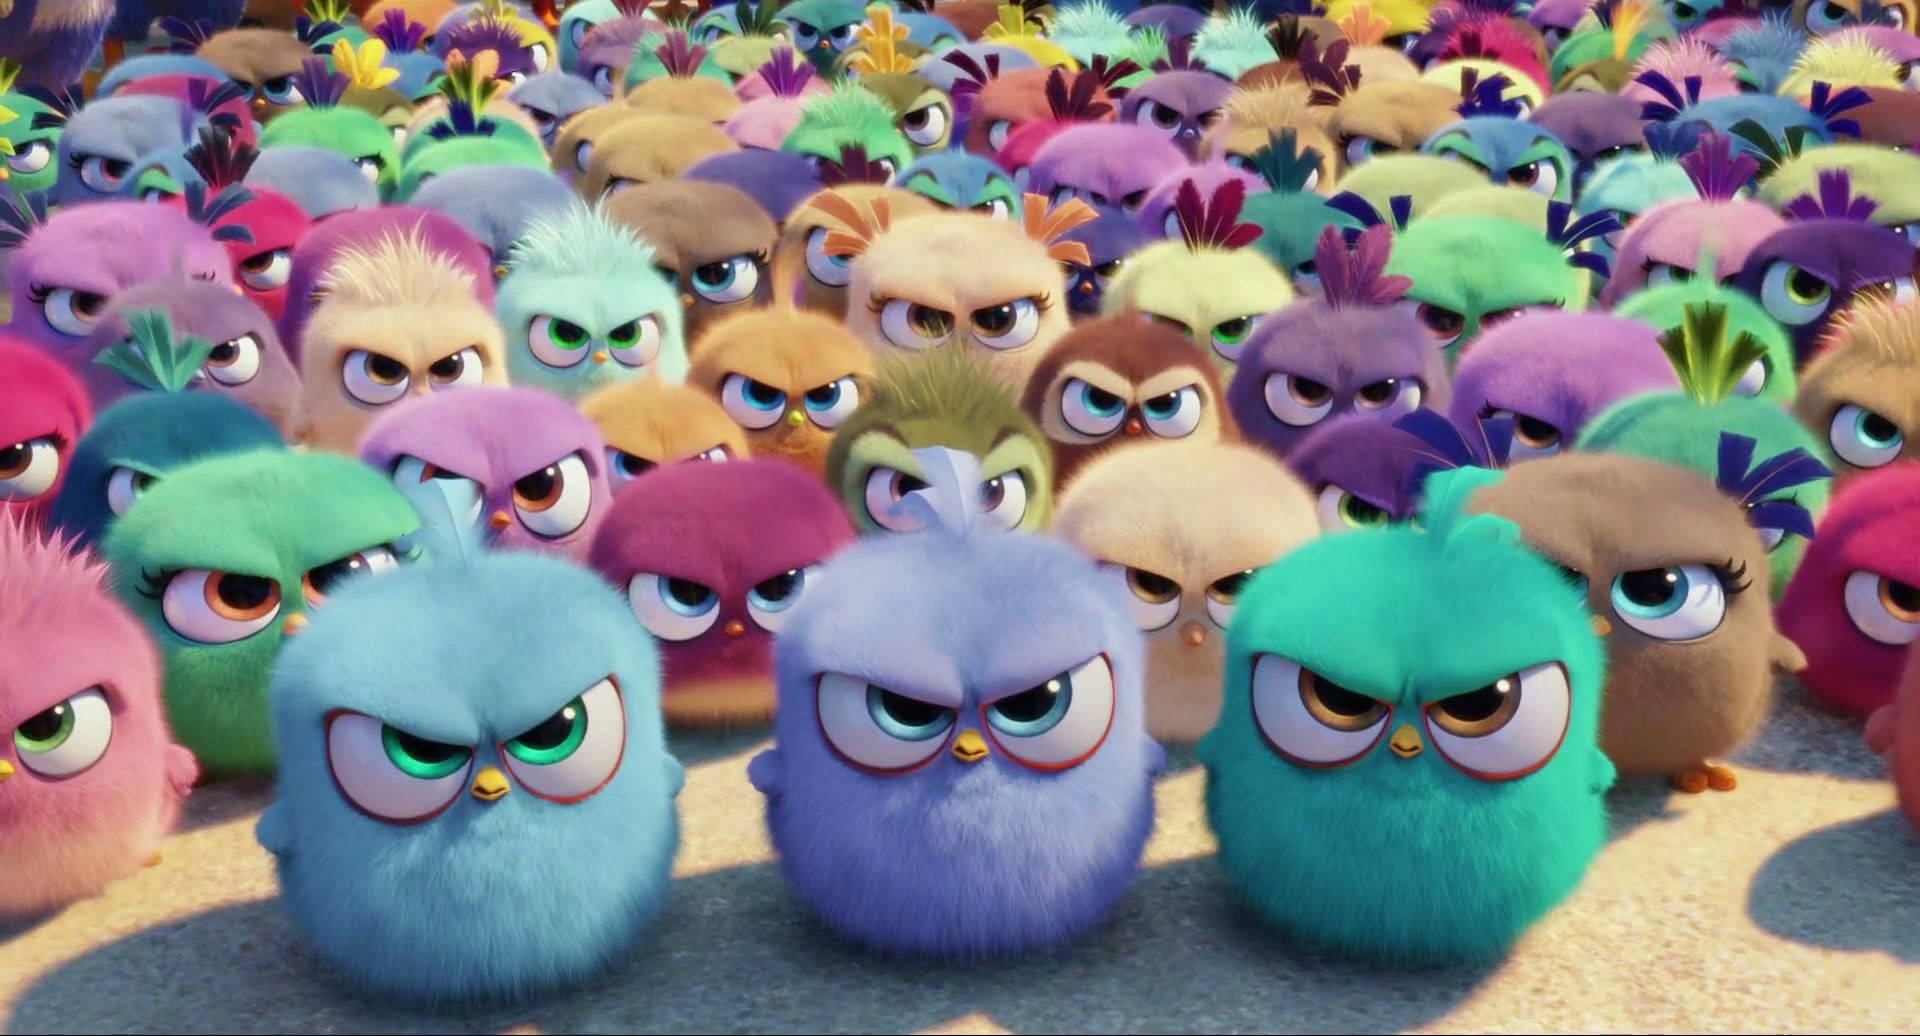 The Angry Birds Movie Featuring Angry Hatchlings Wallpaper